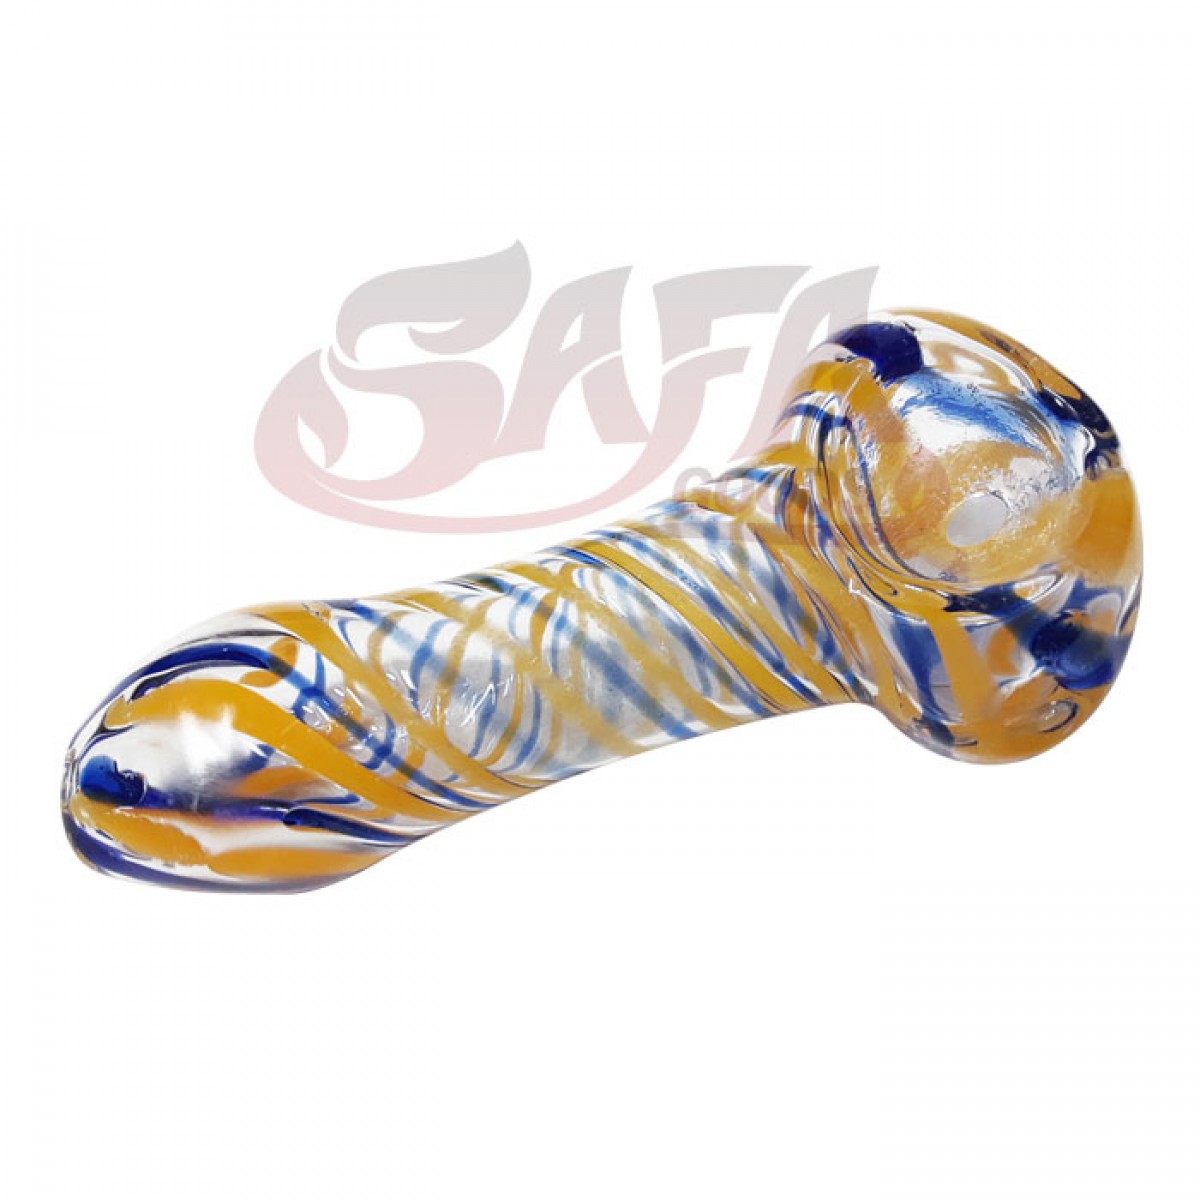 2.5 Inch Glass Hand Pipes - Inside Frit